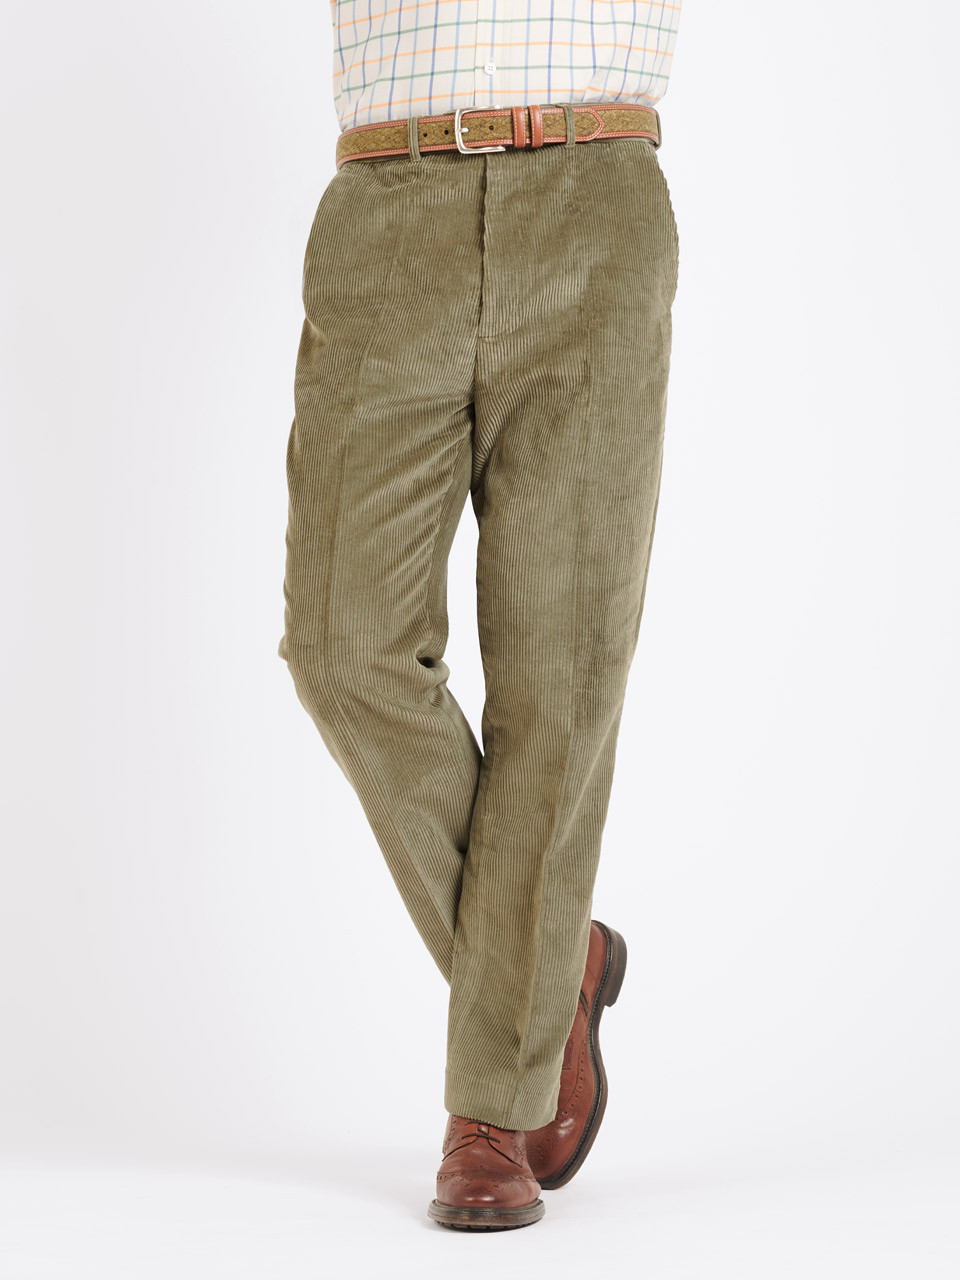 Green Side-buckle cotton-corduroy trousers, Bode